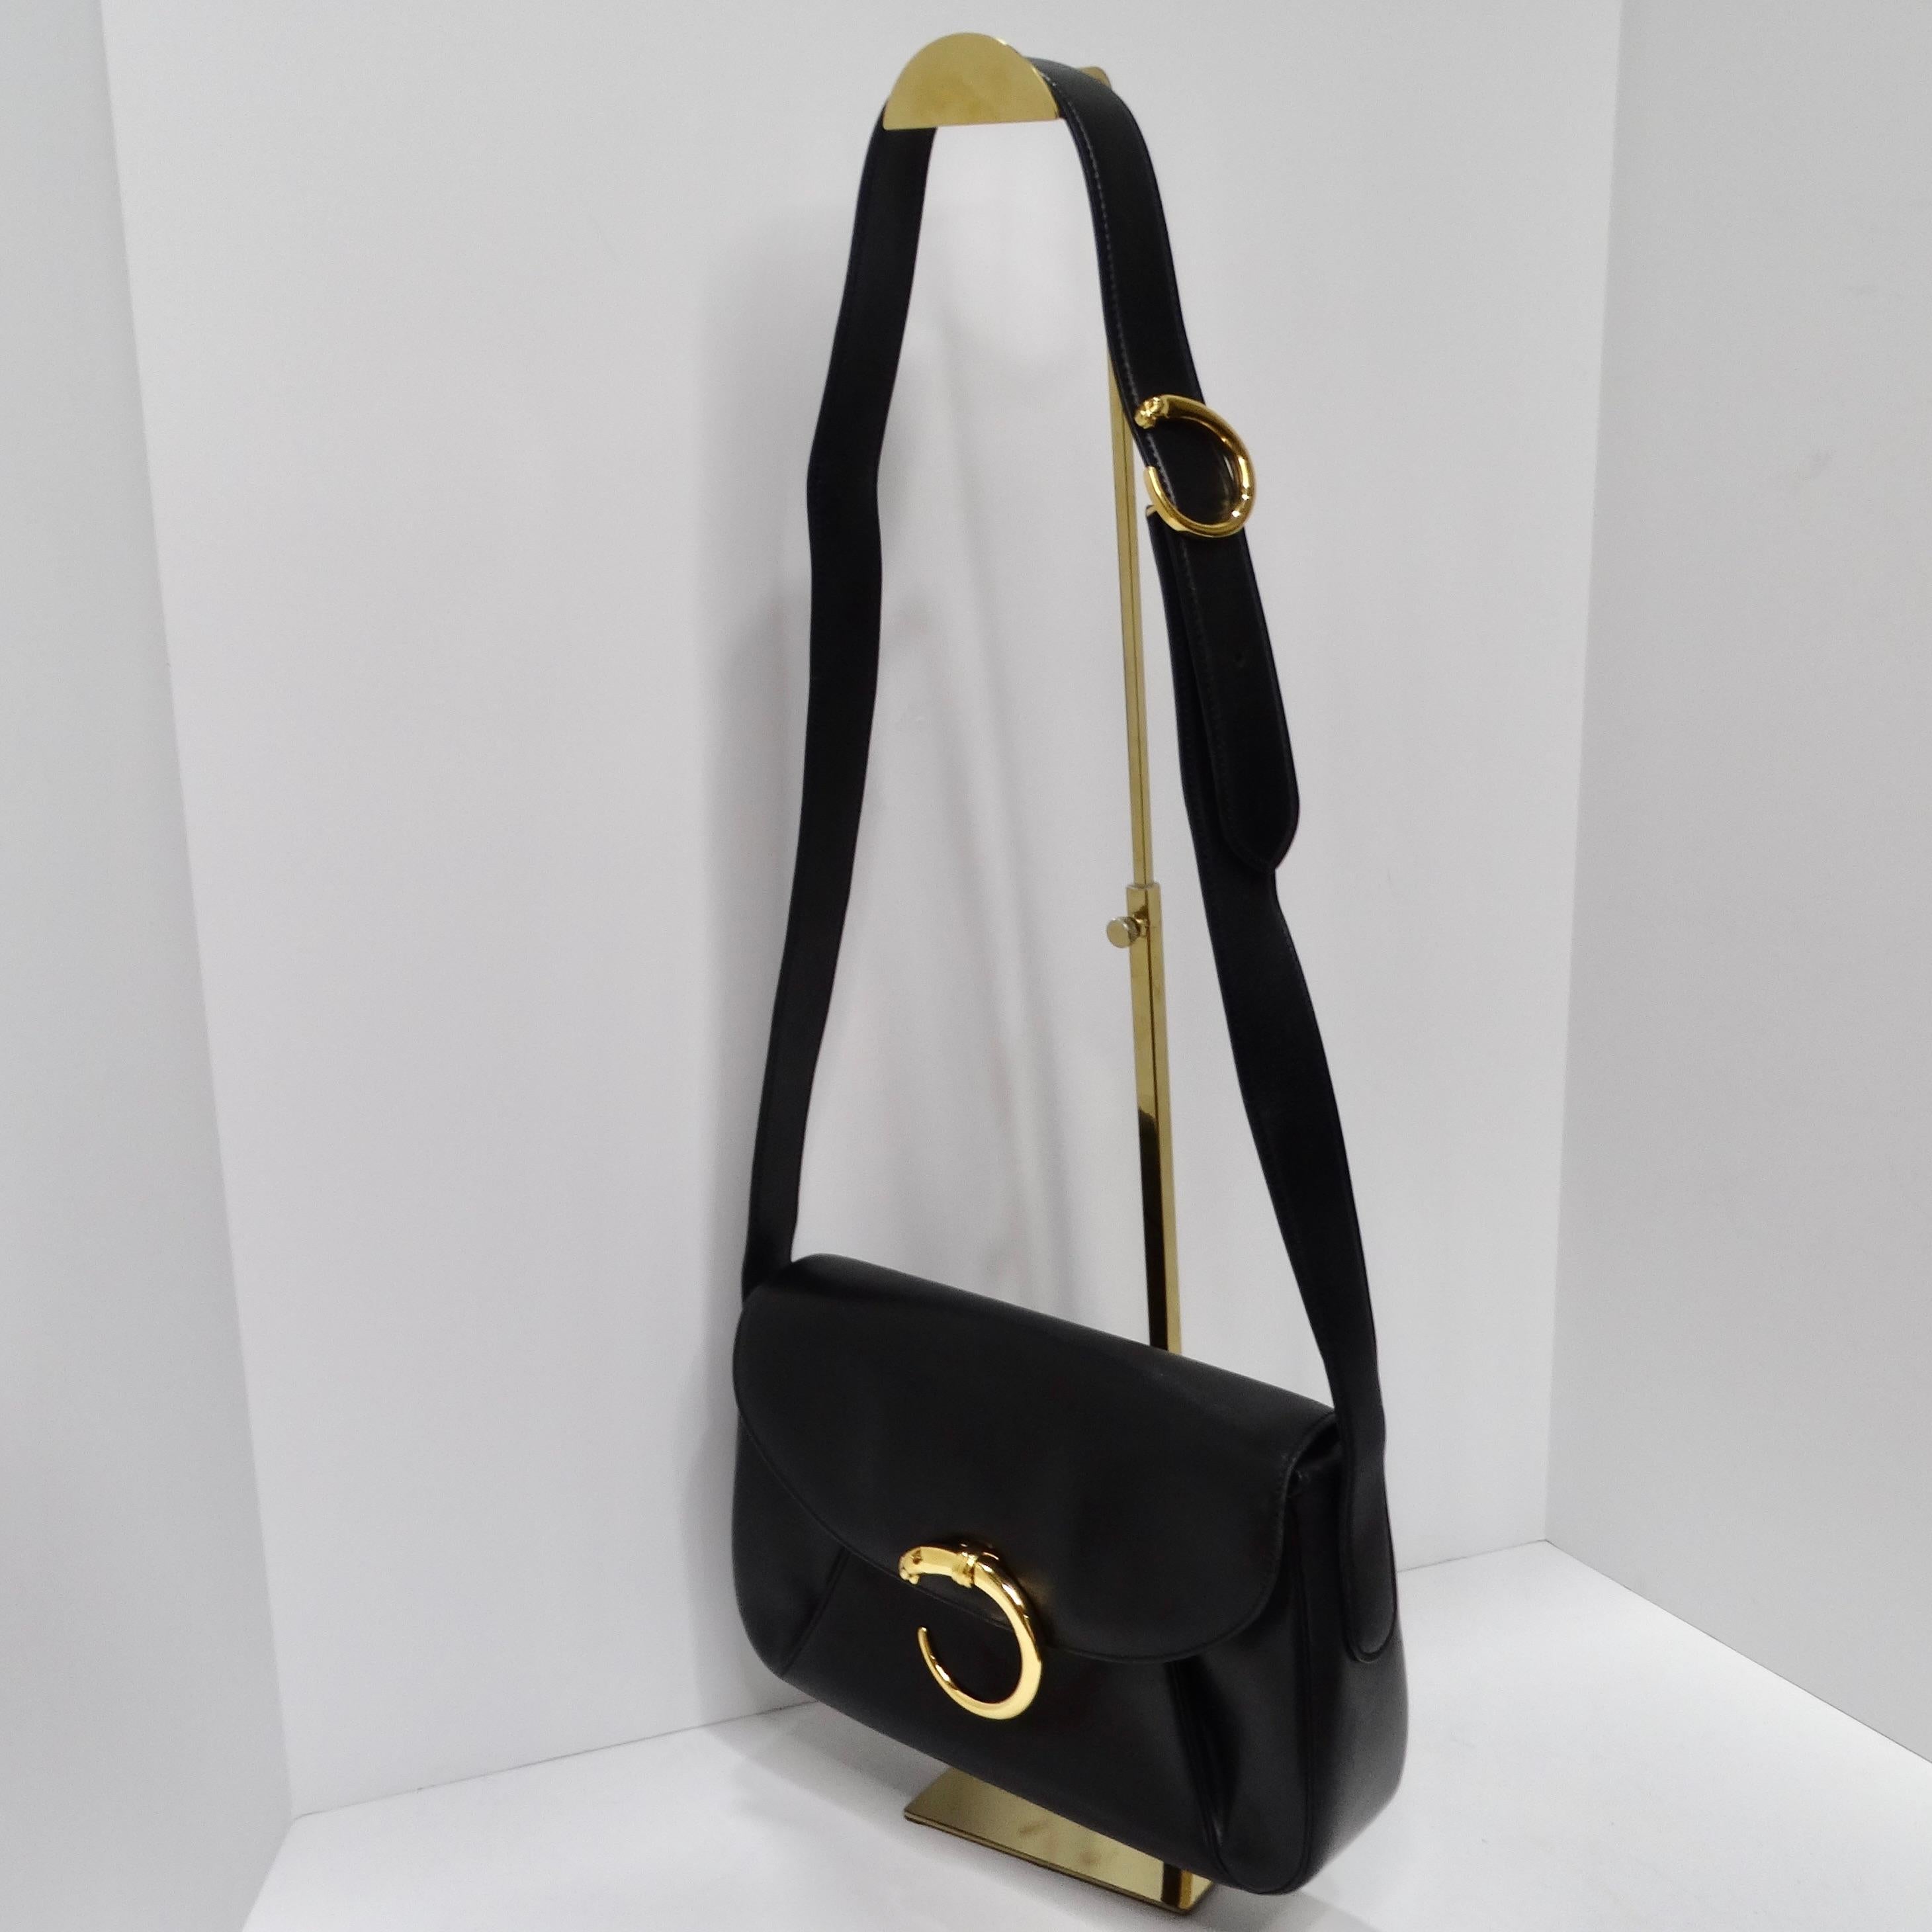 Cartier 1990s Black Leather Classic Panthere Shoulder Bag In Excellent Condition For Sale In Scottsdale, AZ